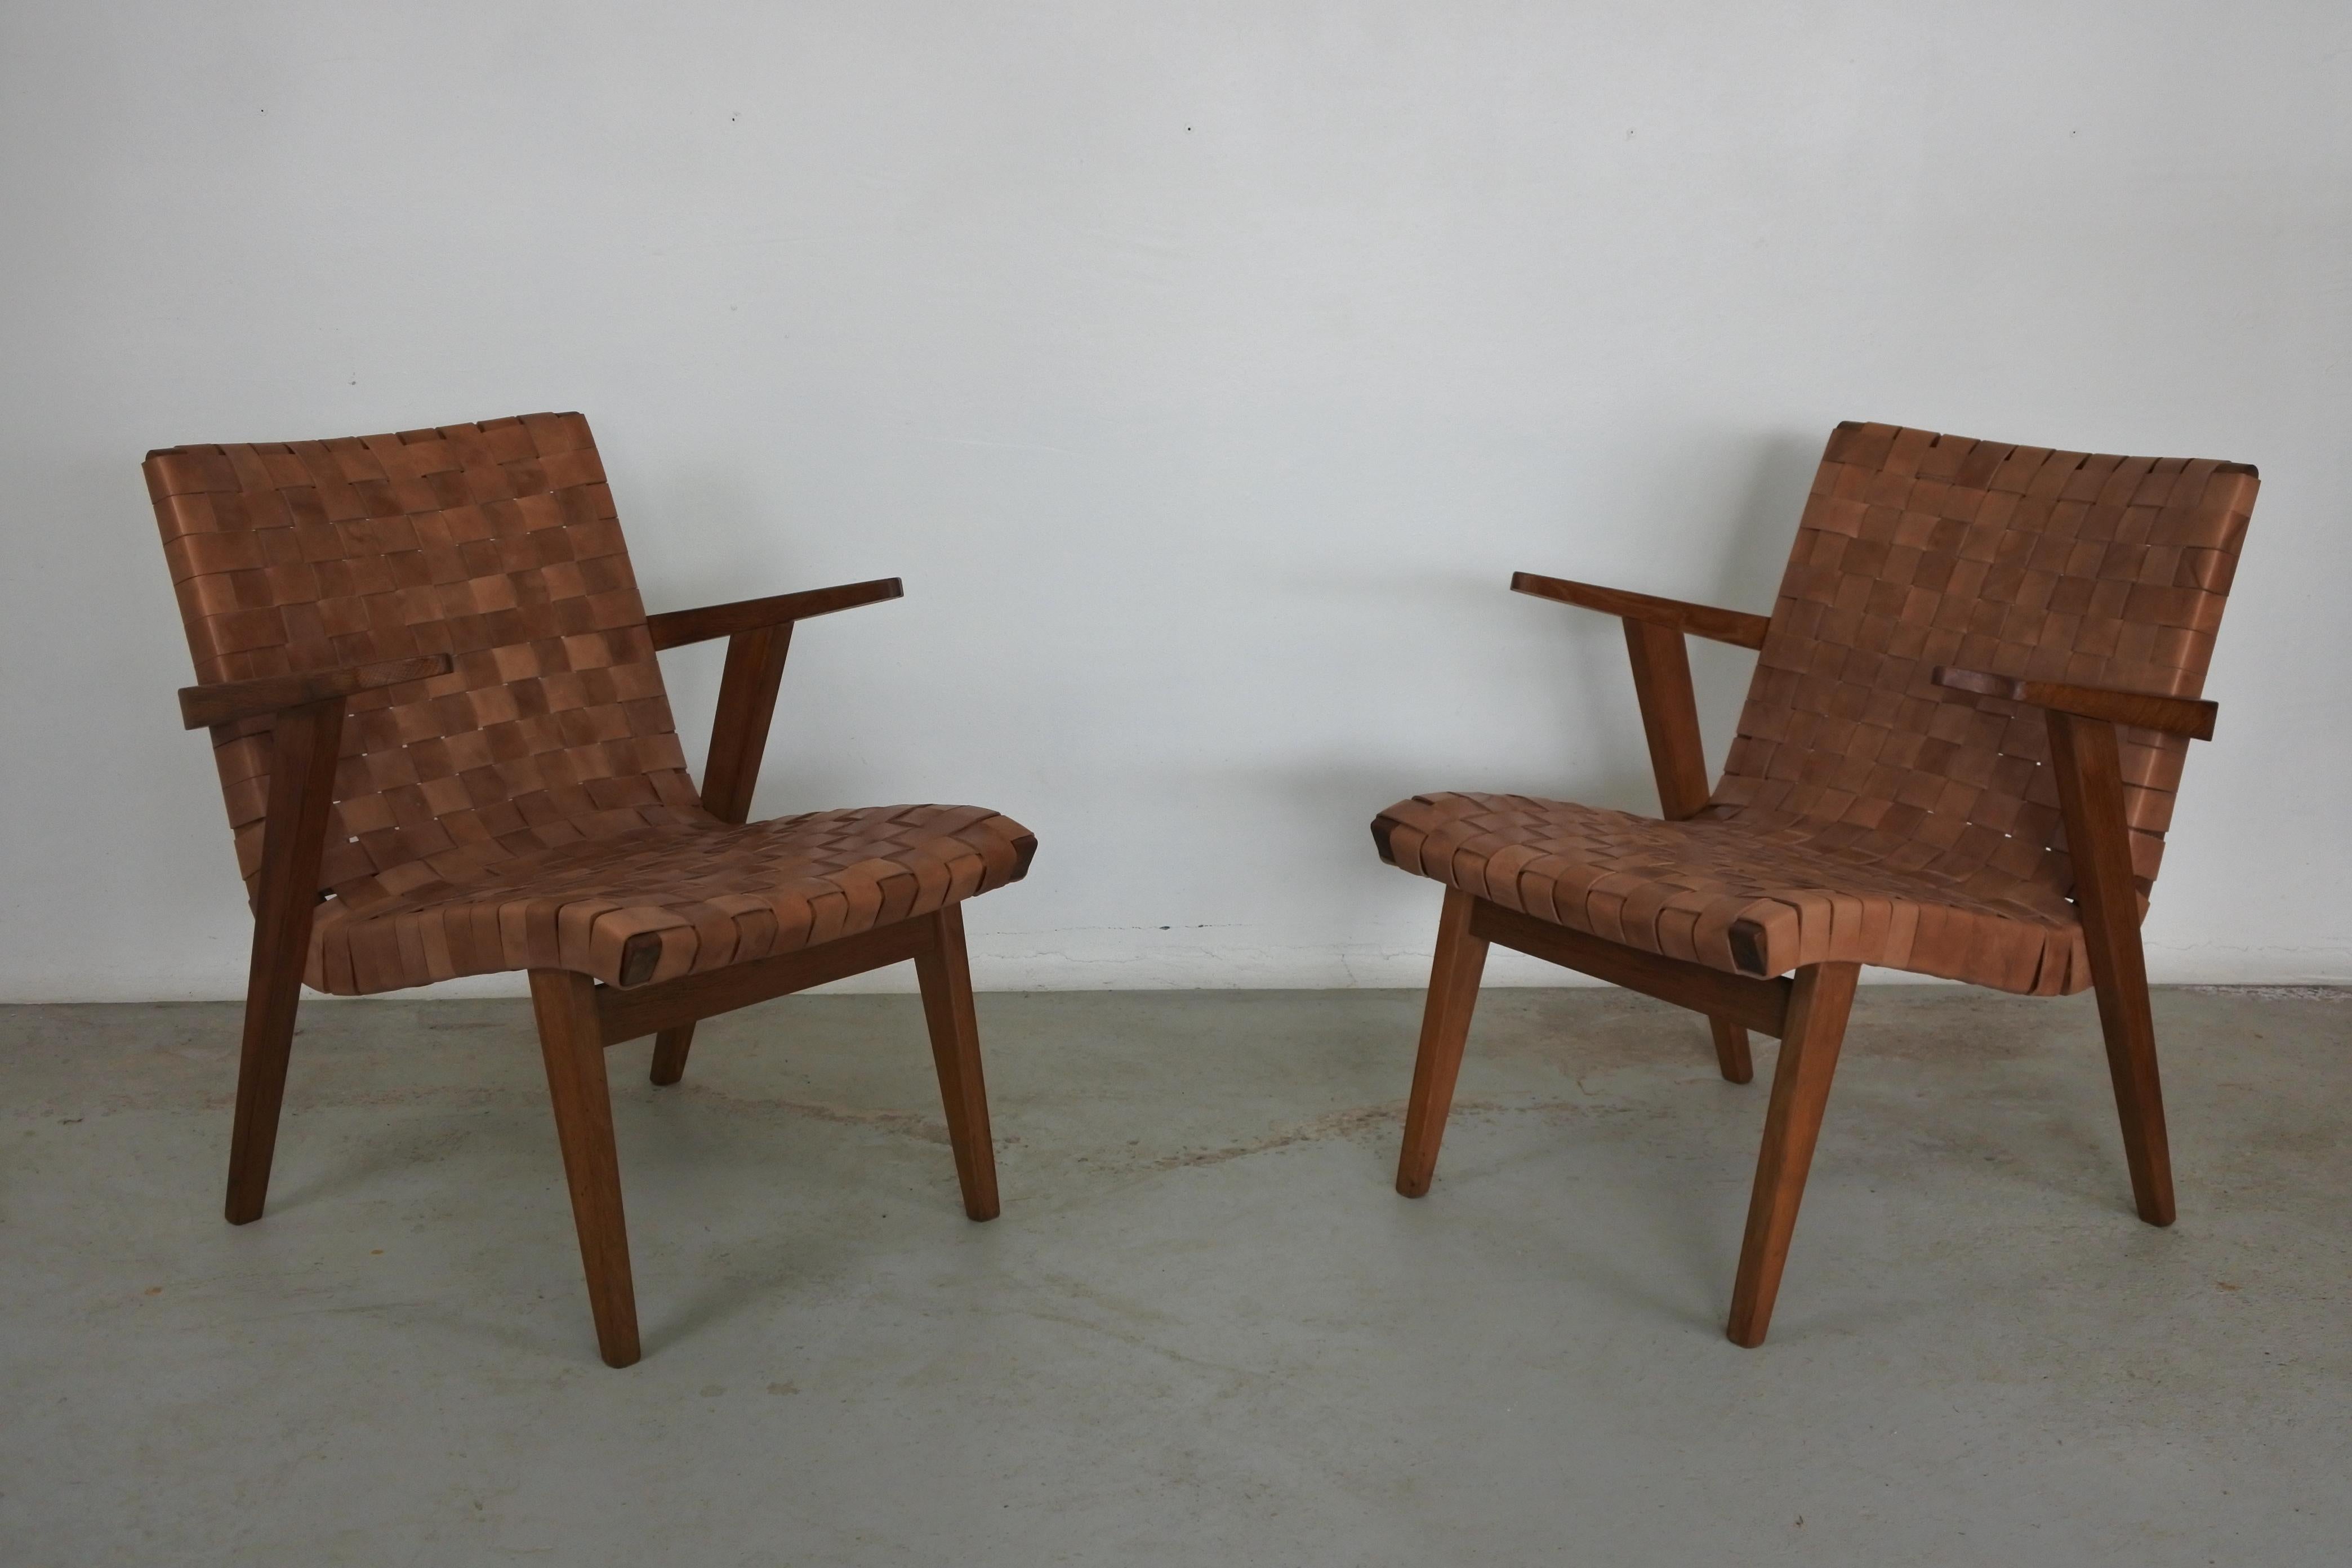 Set of 2 leather webbed and oak wood lounge chairs.
Attributed to Jens Risom for Knoll International.

Great oak grain.